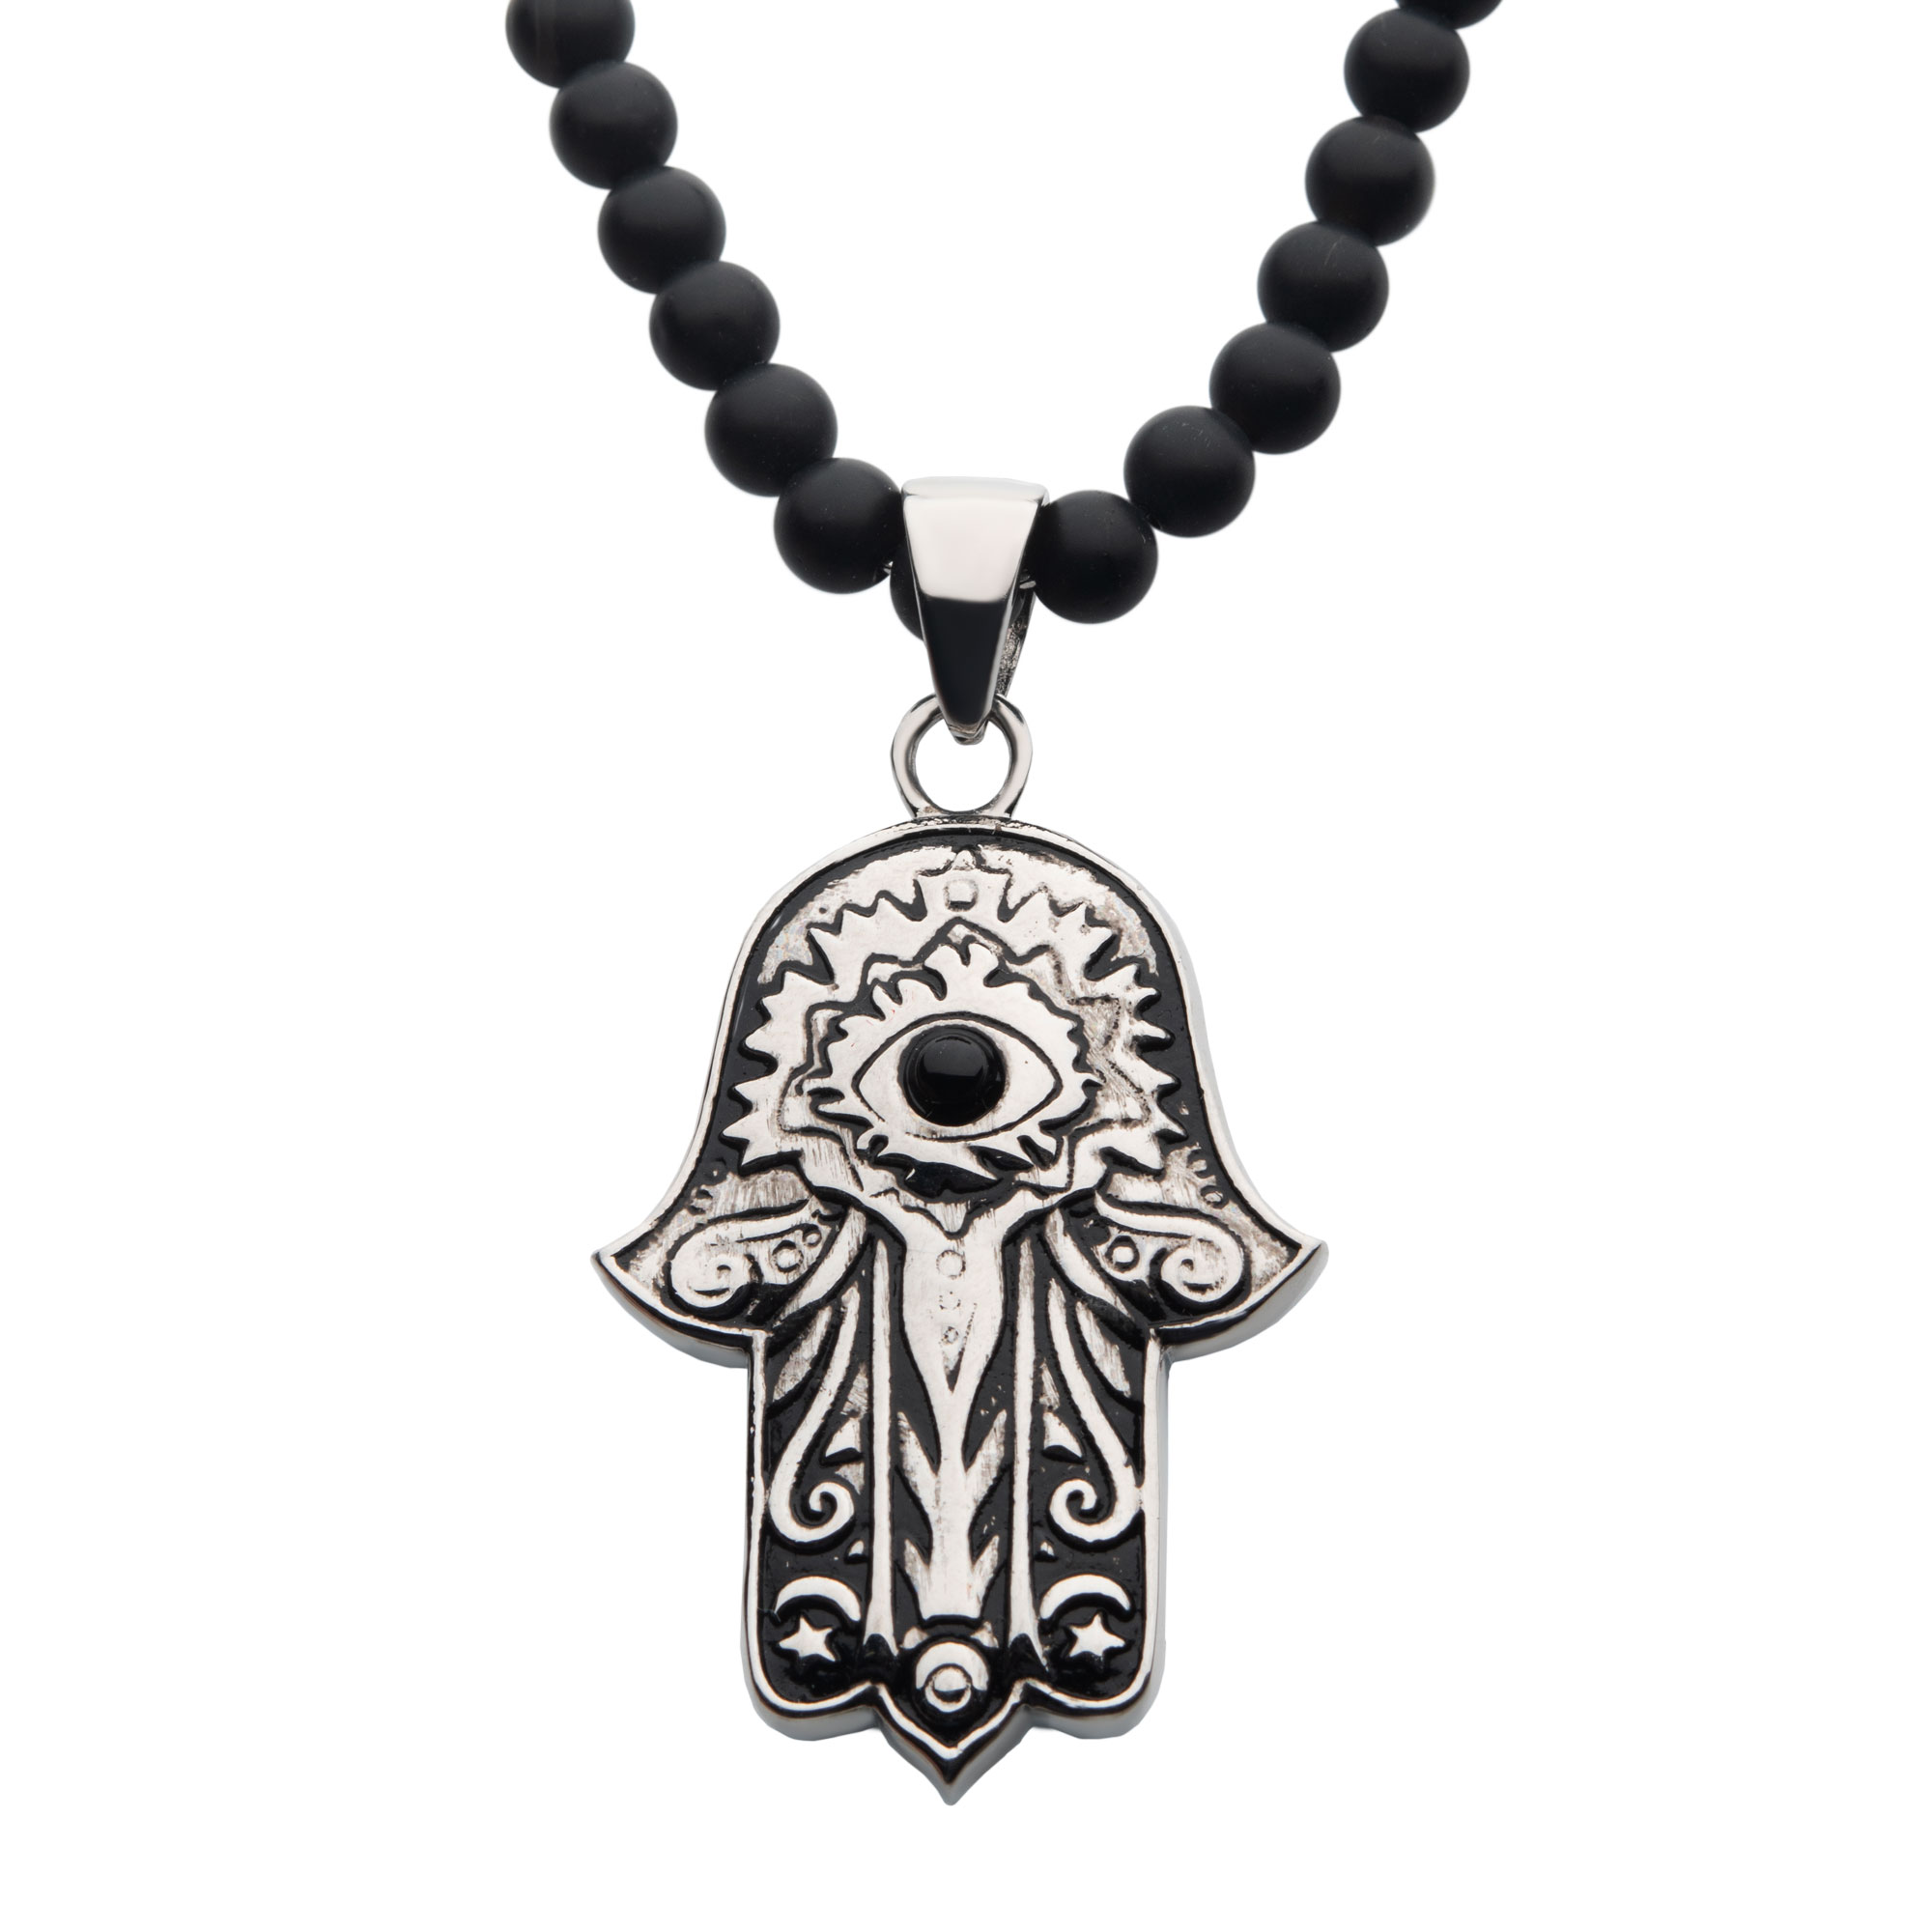 Stainless Steel with Centerpiece Black Agate Stone Hamsa Pendant, with Black Agate Stone Bead Necklace Ken Walker Jewelers Gig Harbor, WA